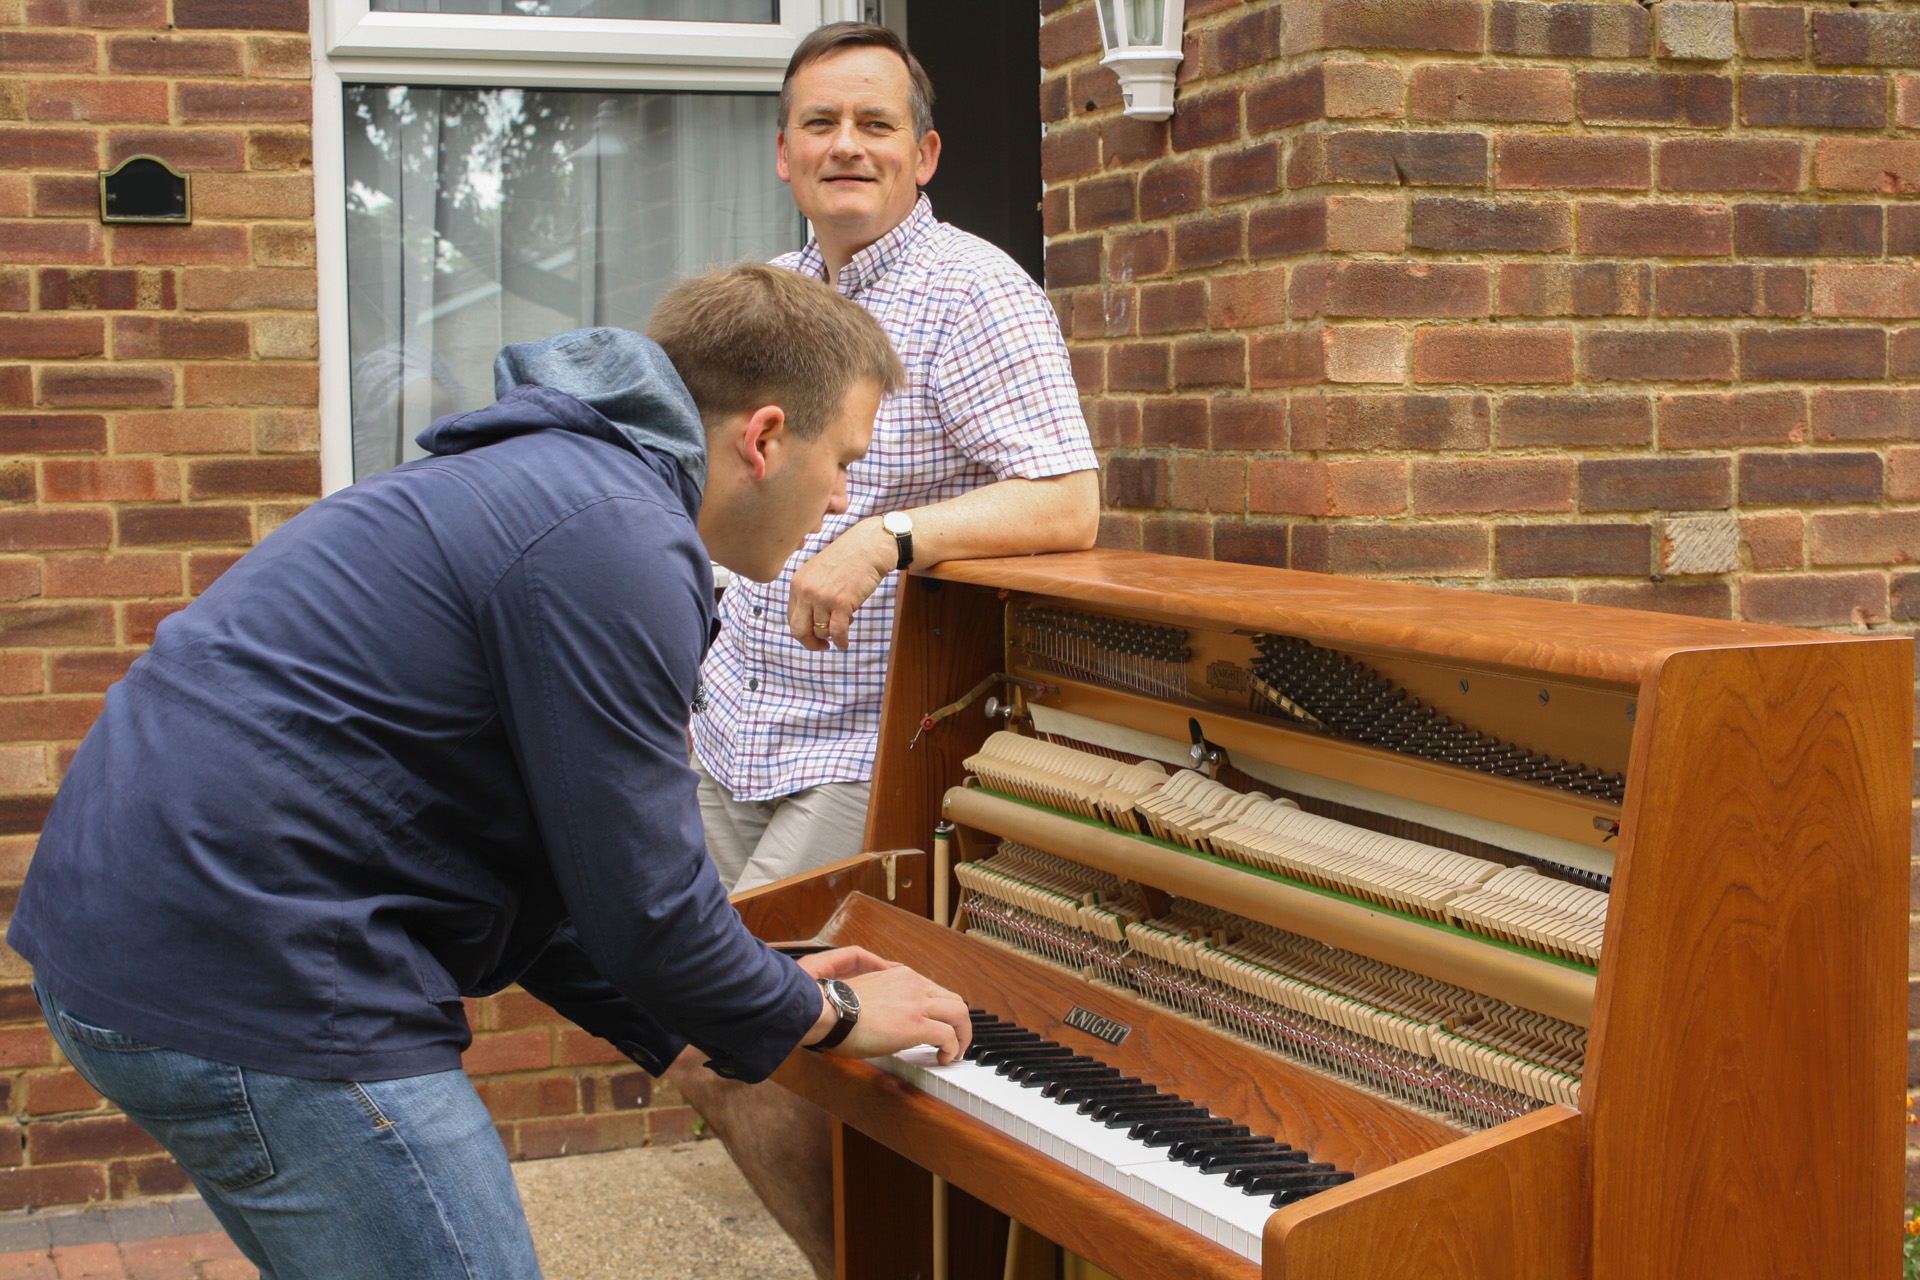 "You'd be mad not to", Andrew explained to his father, Richard, as he started playing.